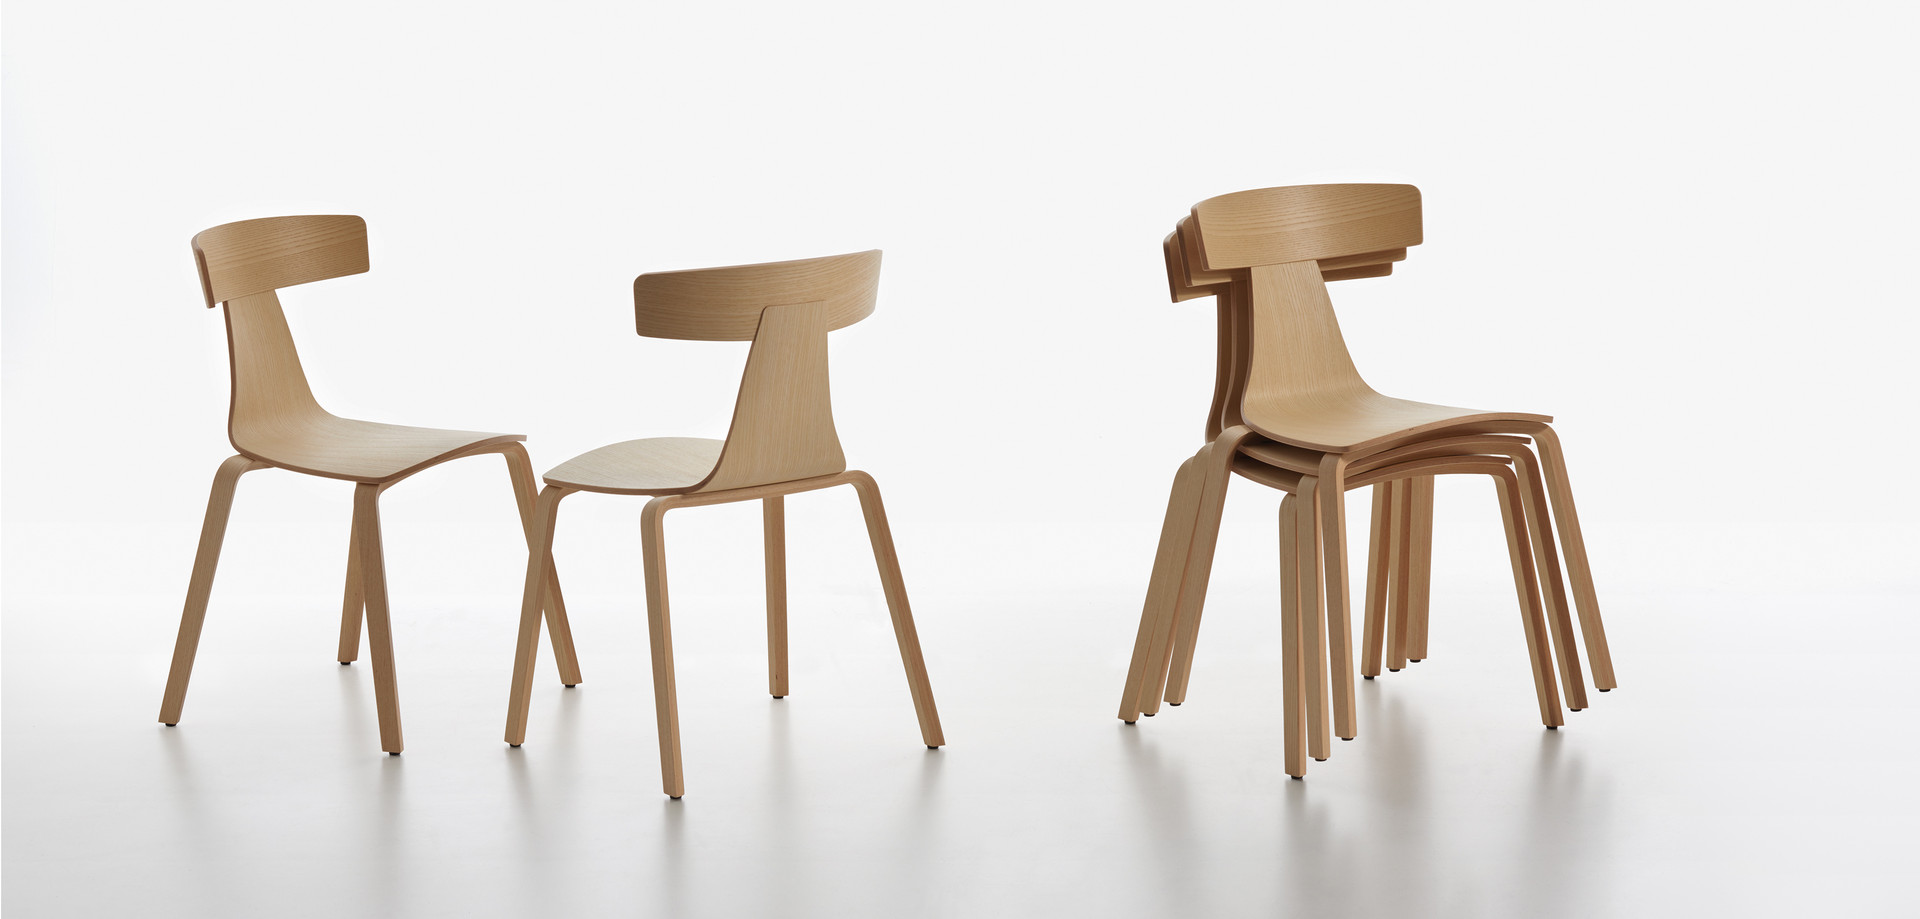 Plank - REMO wood chair, natural finished ash, stackable and not stackable.